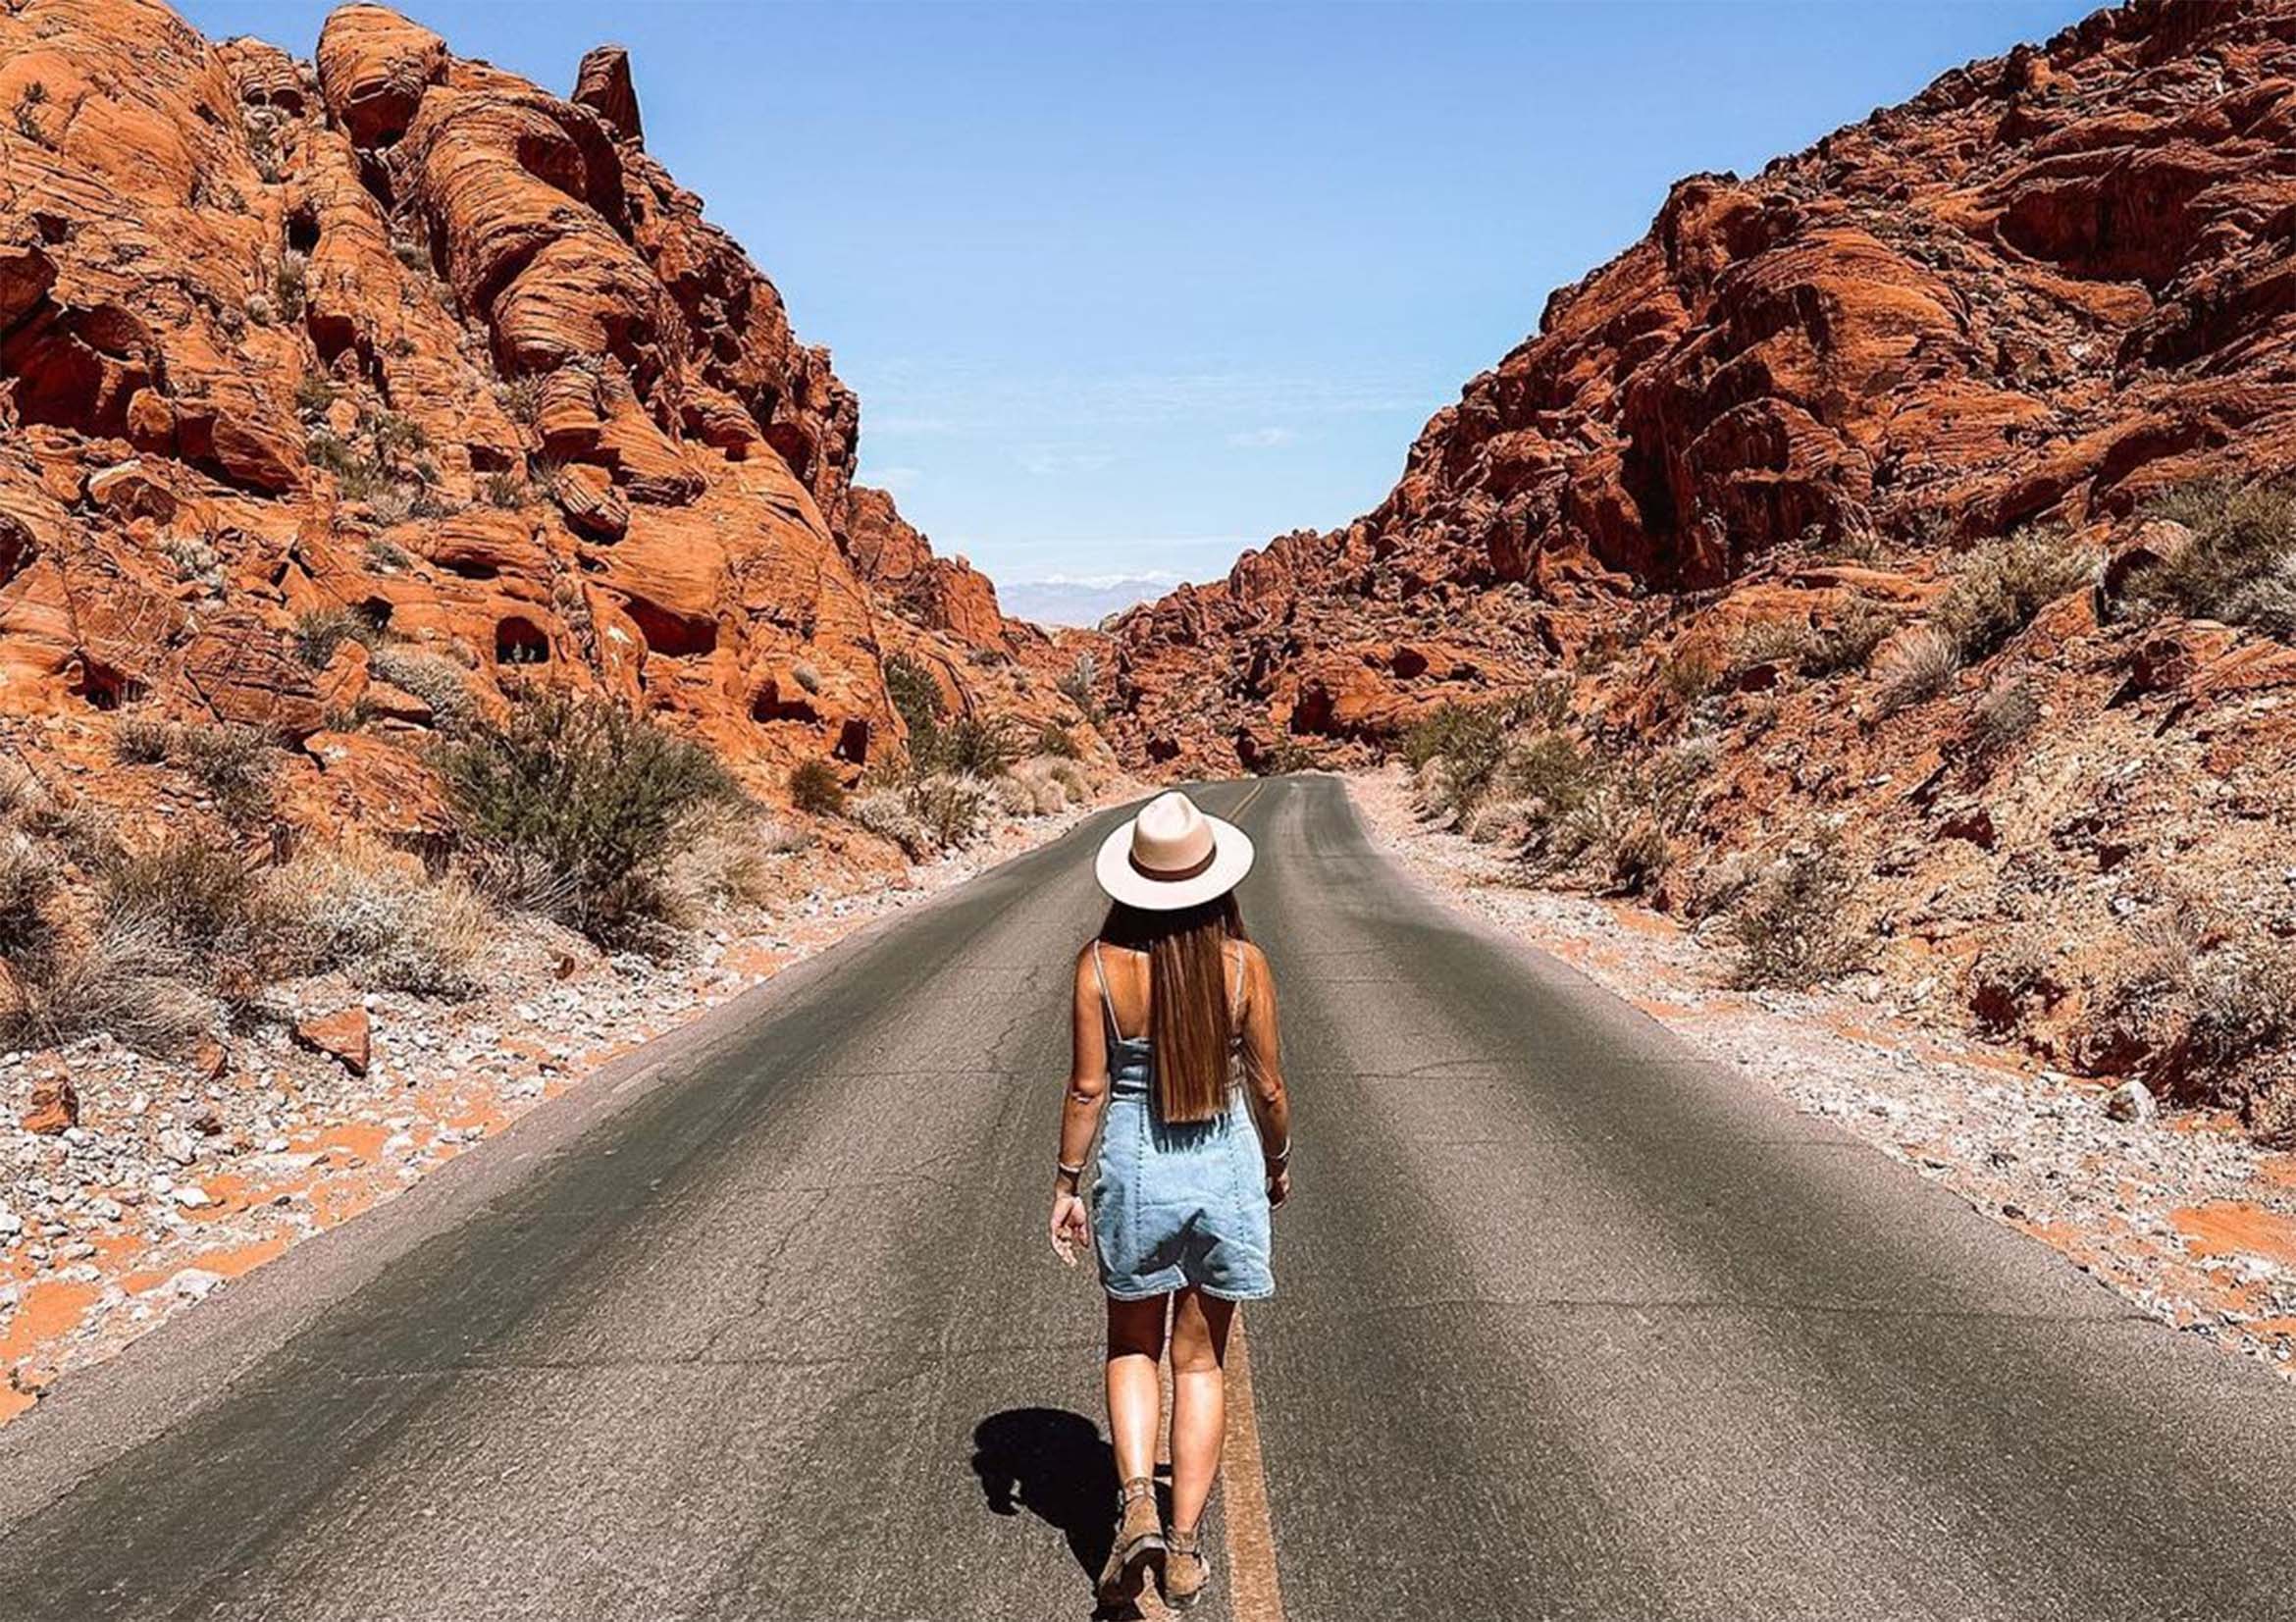 Souvenirs and Surprises: Where to Shop for Unique Finds in Valley of Fire